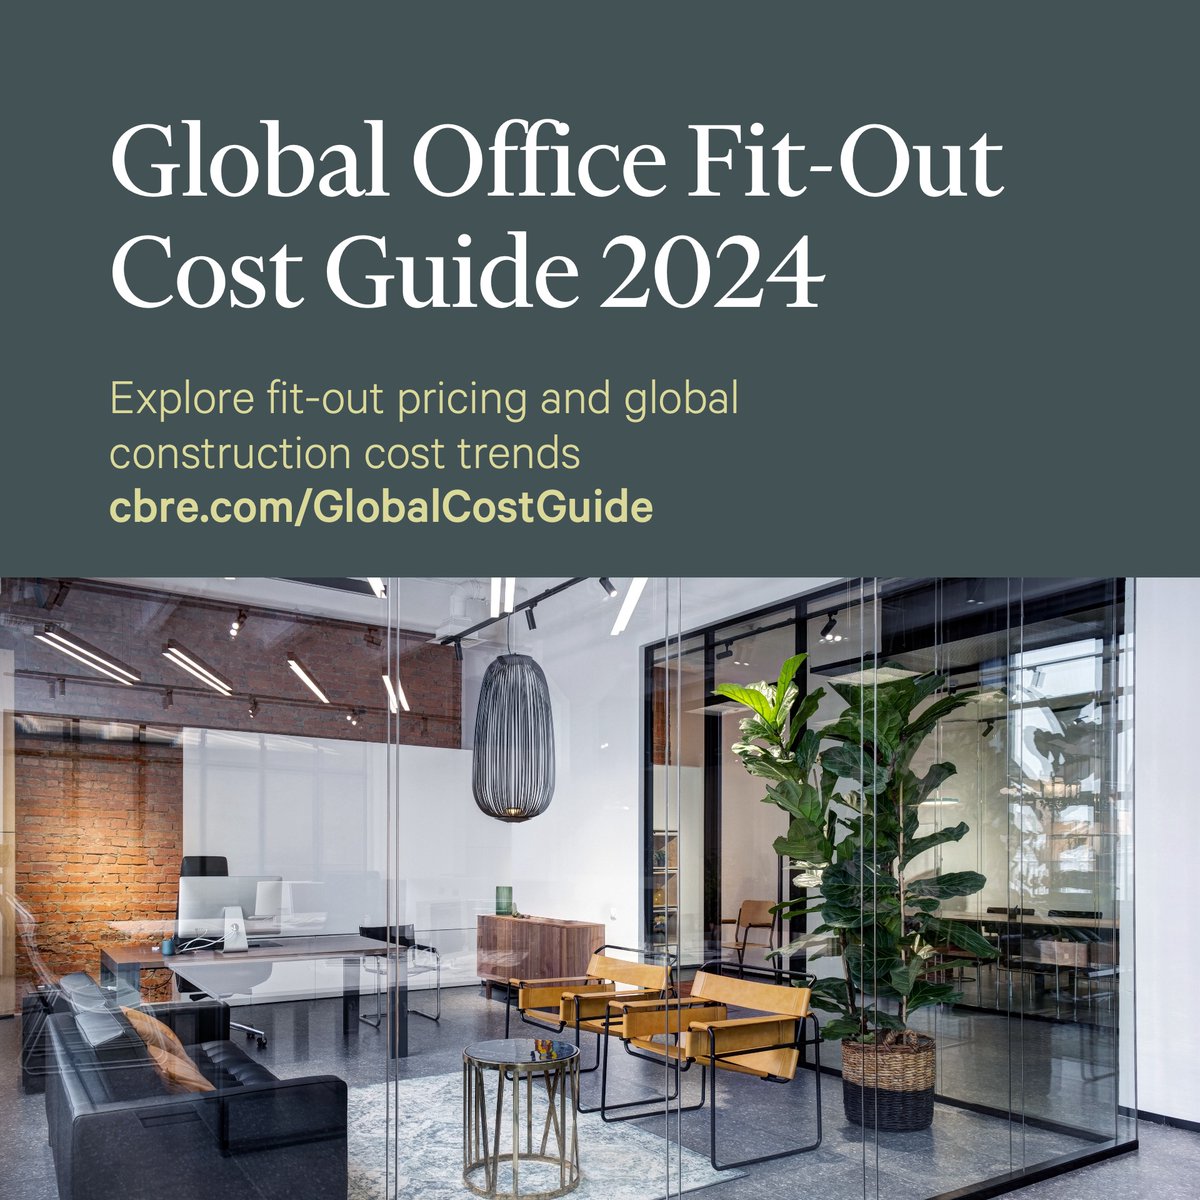 CBRE’s Global Office Fit-Out Cost Guide provides comprehensive cost benchmarks for 134 cities across 74 countries and offers insights into the industry trends influencing workplace design in key global regions. cbre.co/3vPllFh